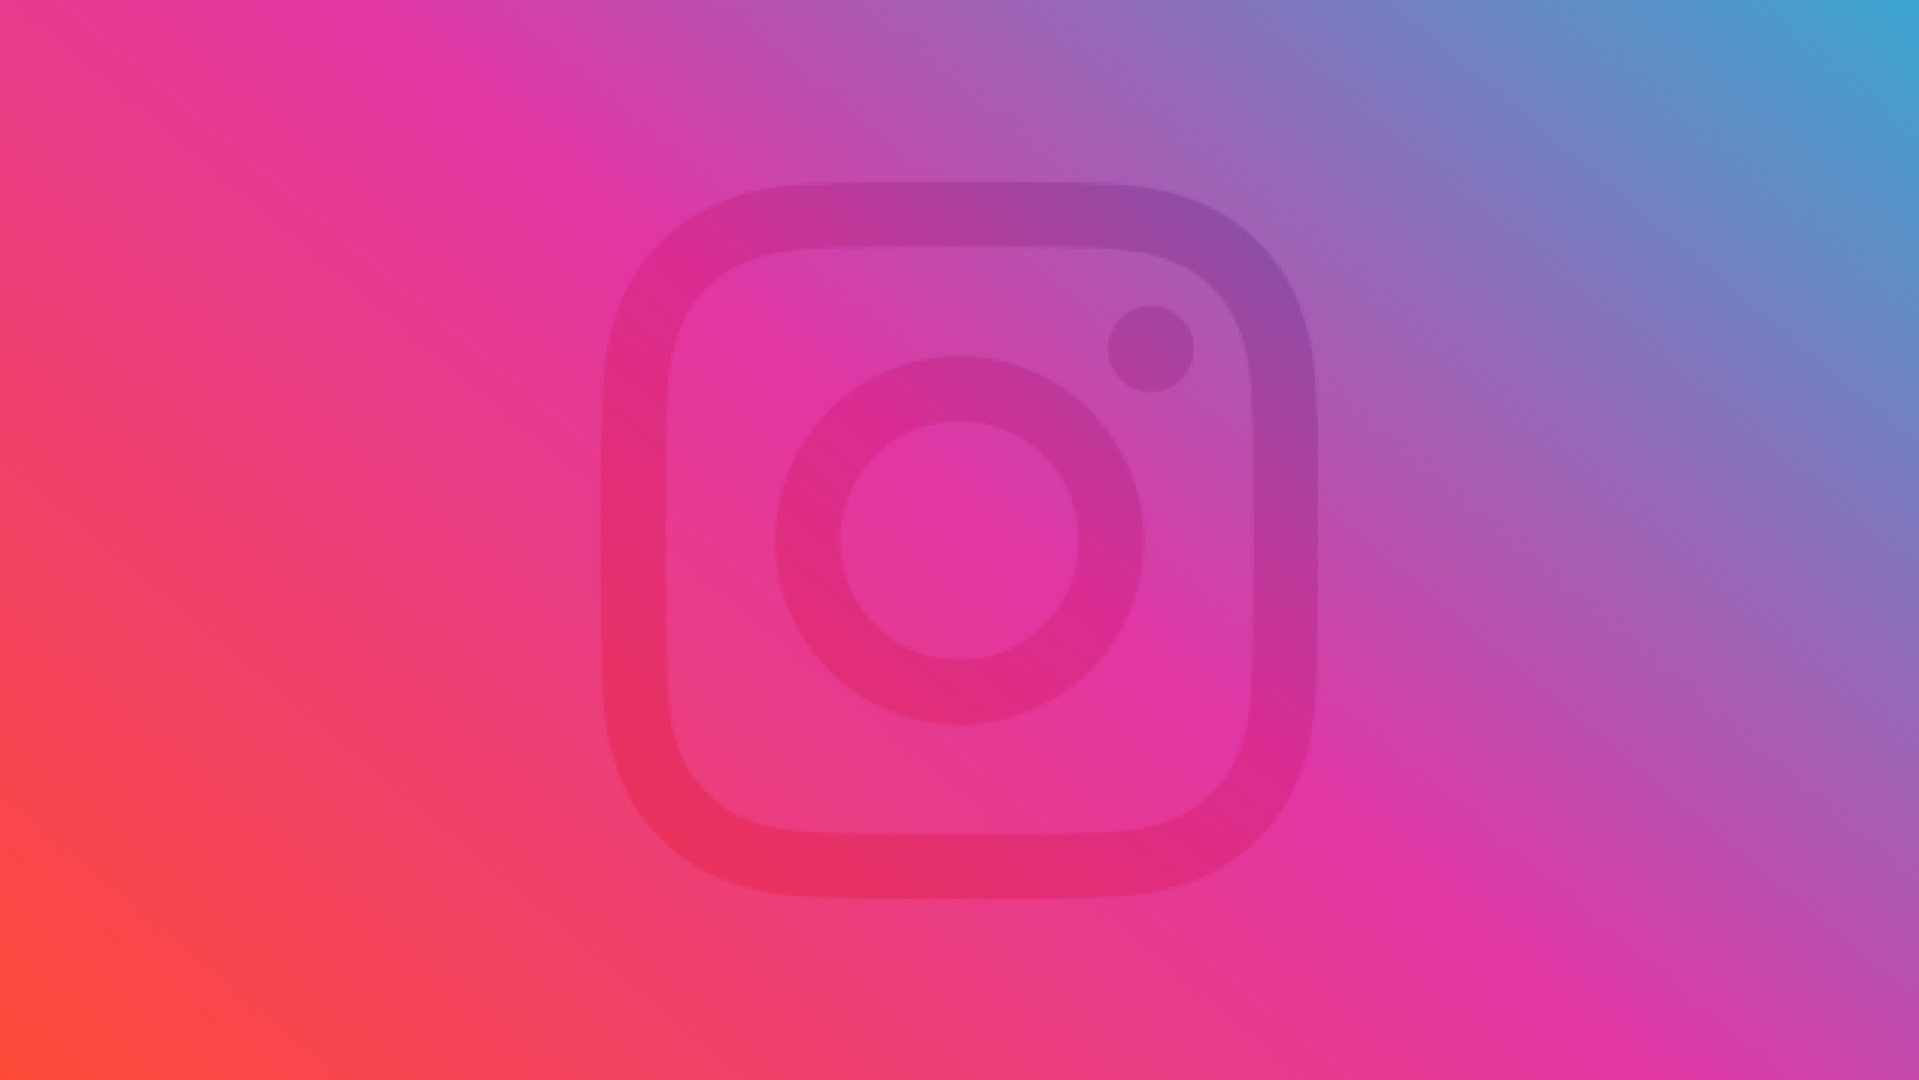 Instagram is the next frontier of commercial skills